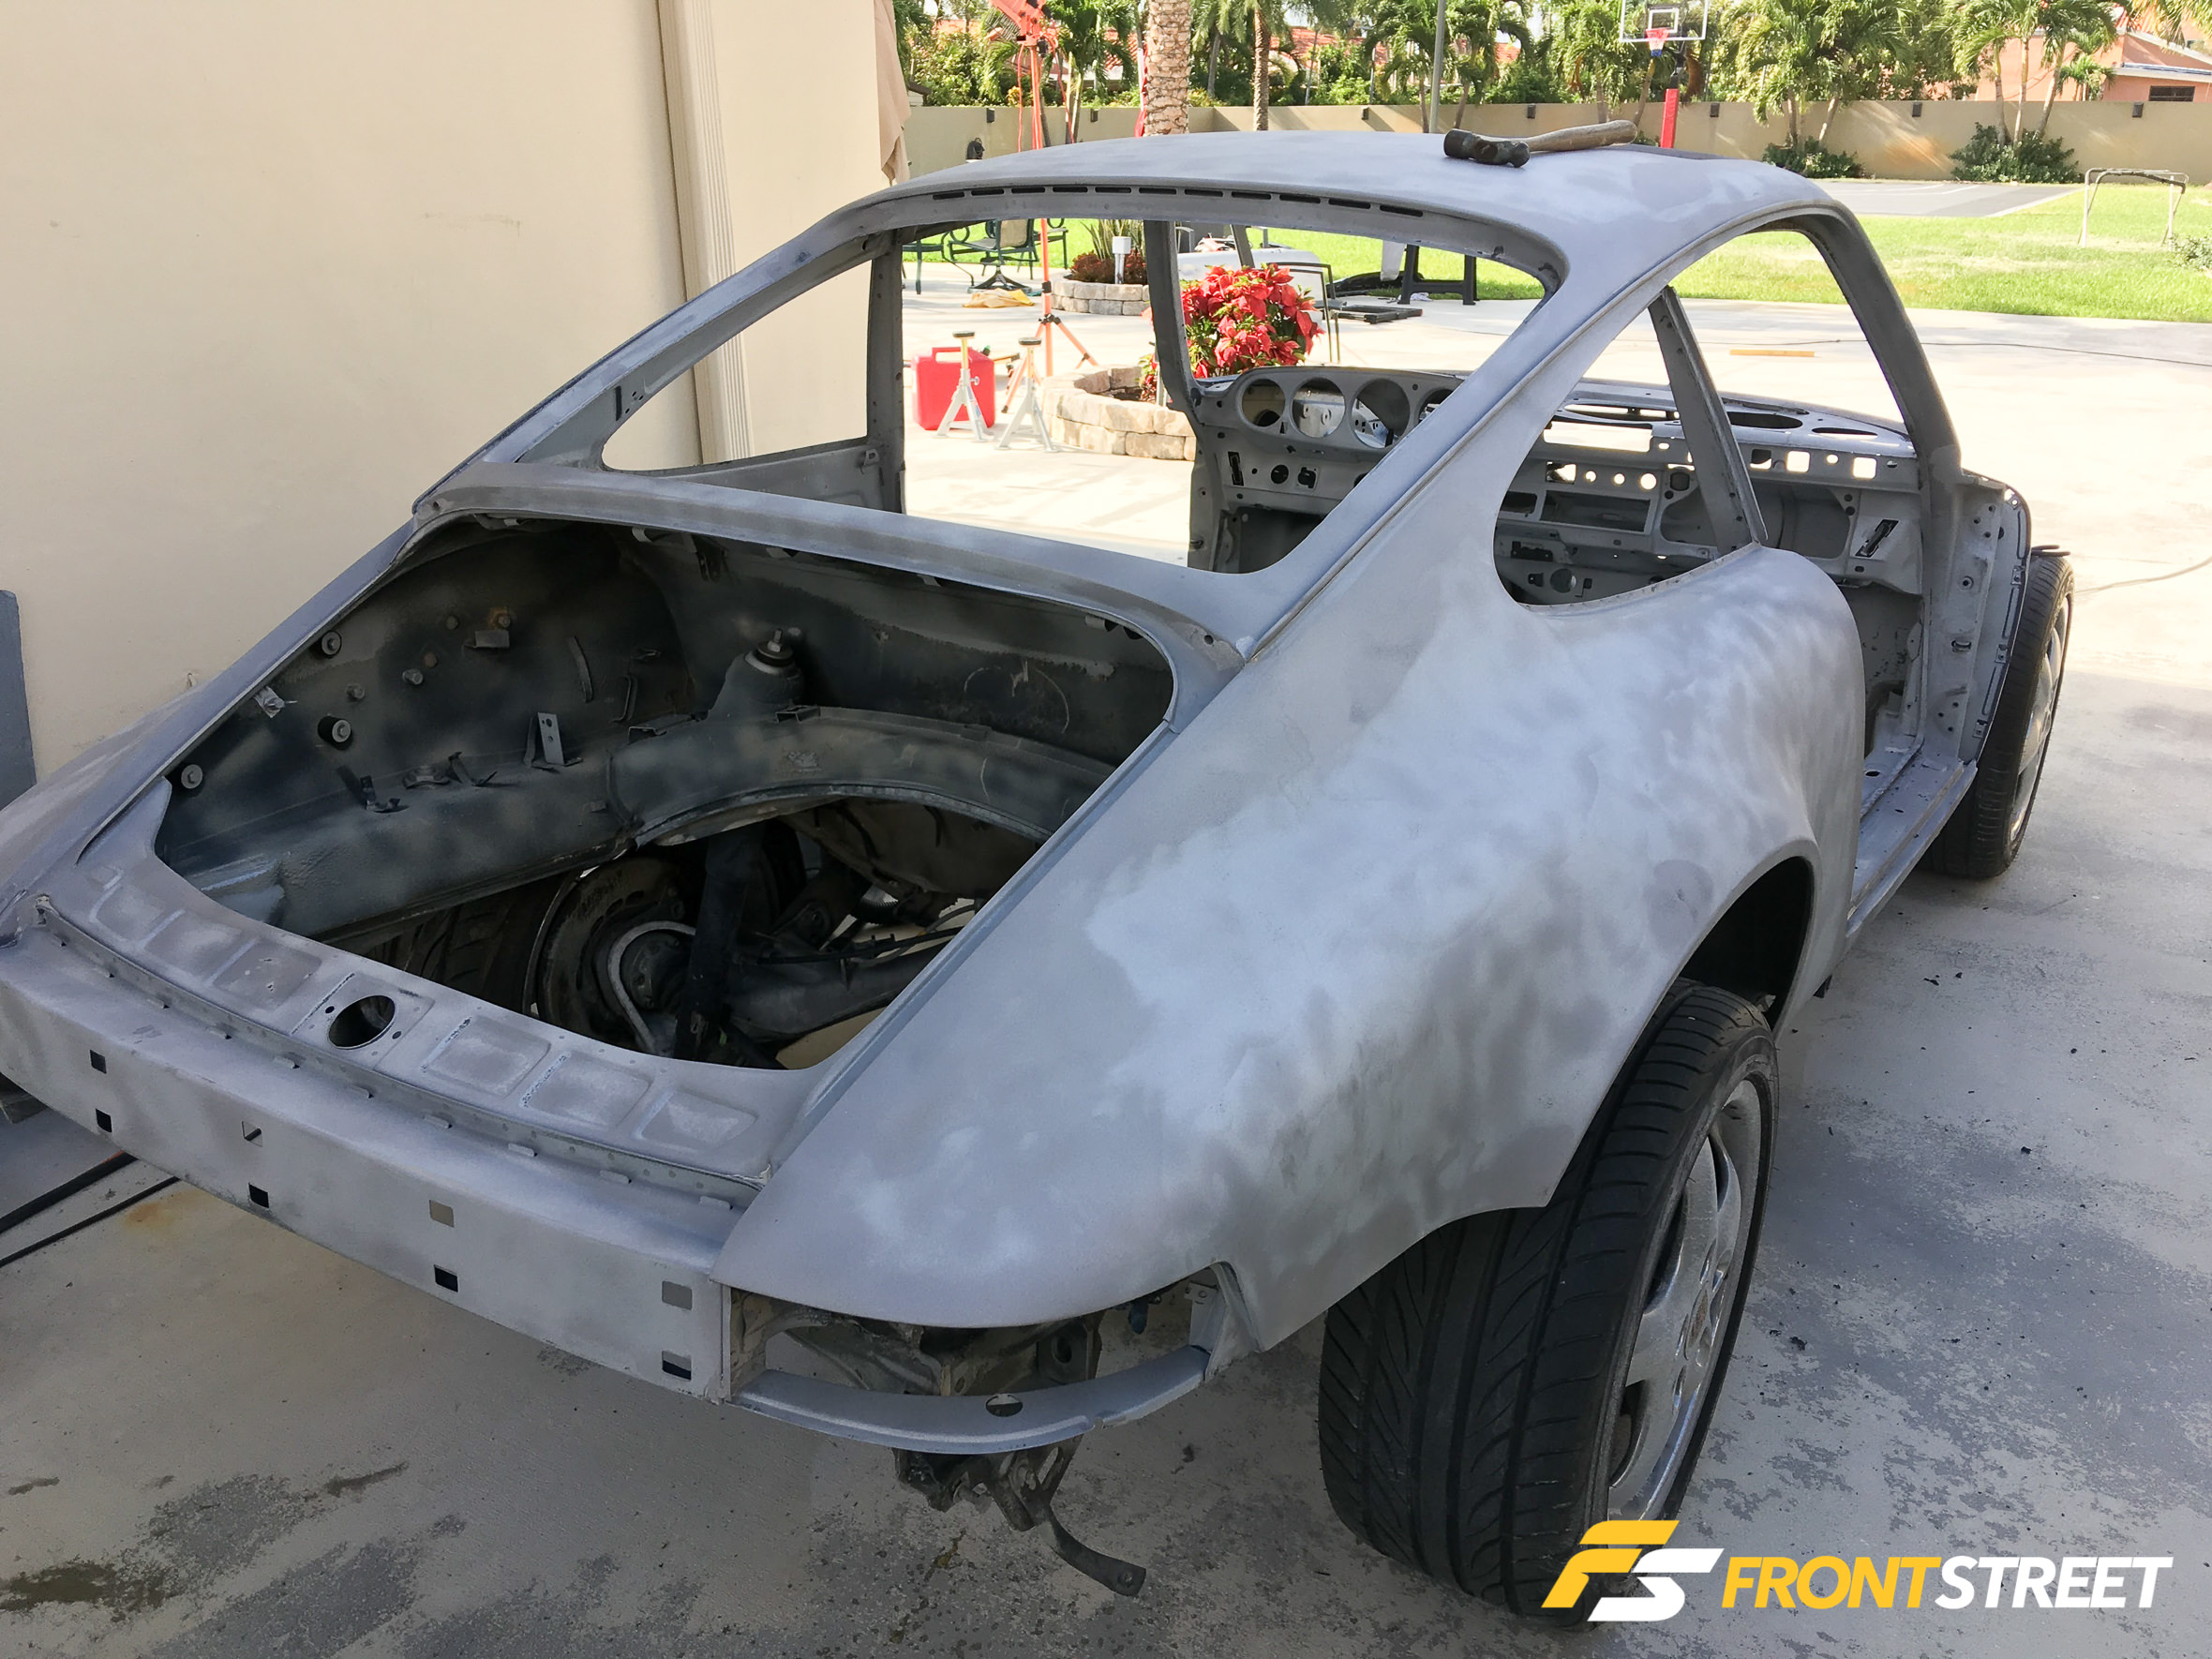 Why The World Needs More Of Alex Aguiar's Tinkered 1985 Porsche 911